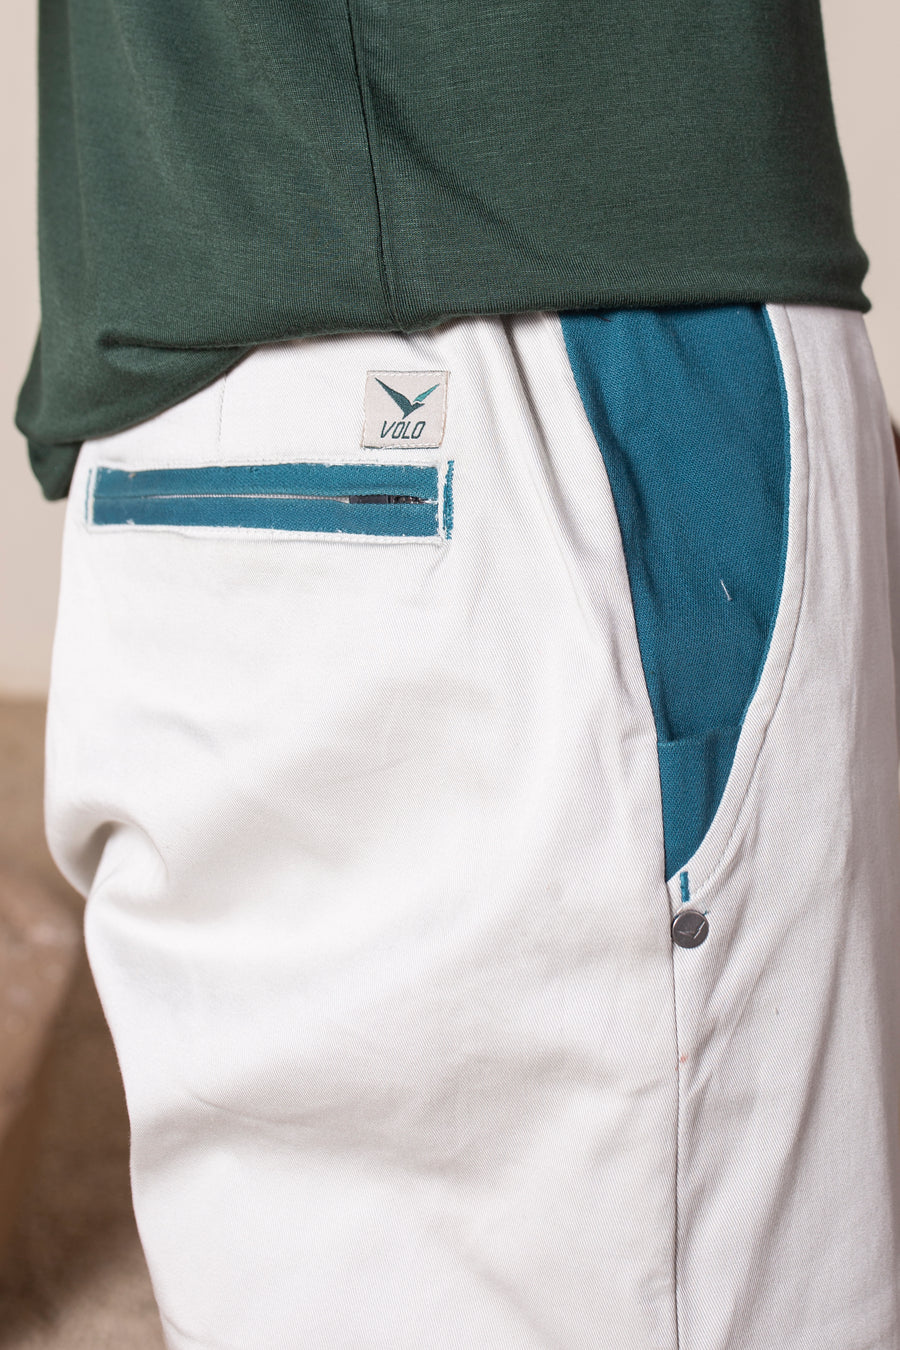 Men's Earth Joggers White | VOLO Apparel | Designed for you to rock climb, hike, yoga, run or just chill. The most versatile athletic joggers that are fitted for your every daily life and all your athletic endeavors. The Earth Joggers comes with five pockets, features a 3 point gusset, 2 zipper pockets, snap buttons, tapered bottoms, and a breathable stretchy spandex cotton twill. With an internal drawstring and a tailored fit, these are gonna be your go to adventure joggers.